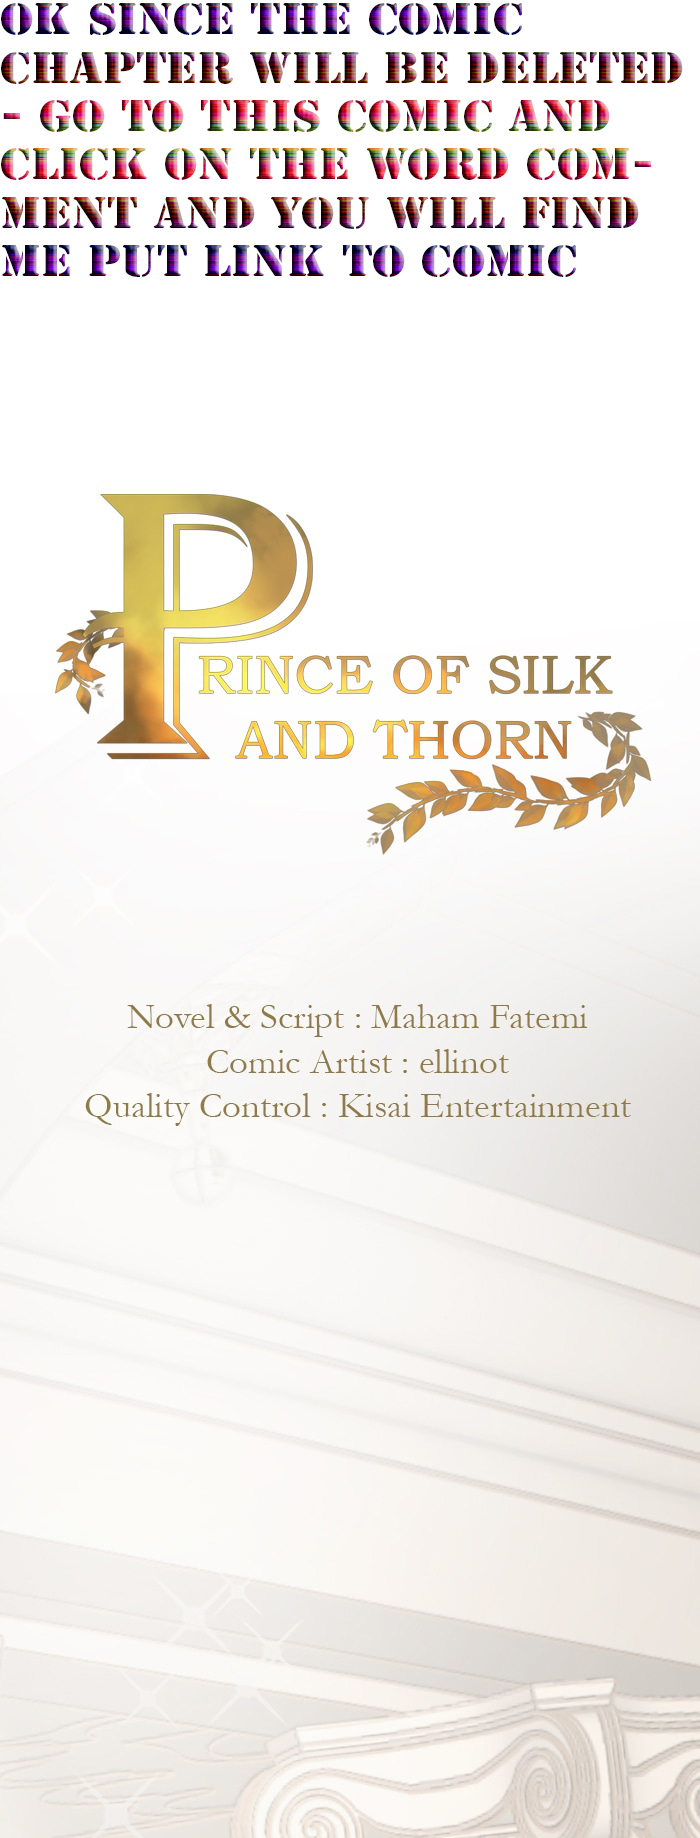 Prince of Silk and Thorn Ch. 0 Something very important beware what is